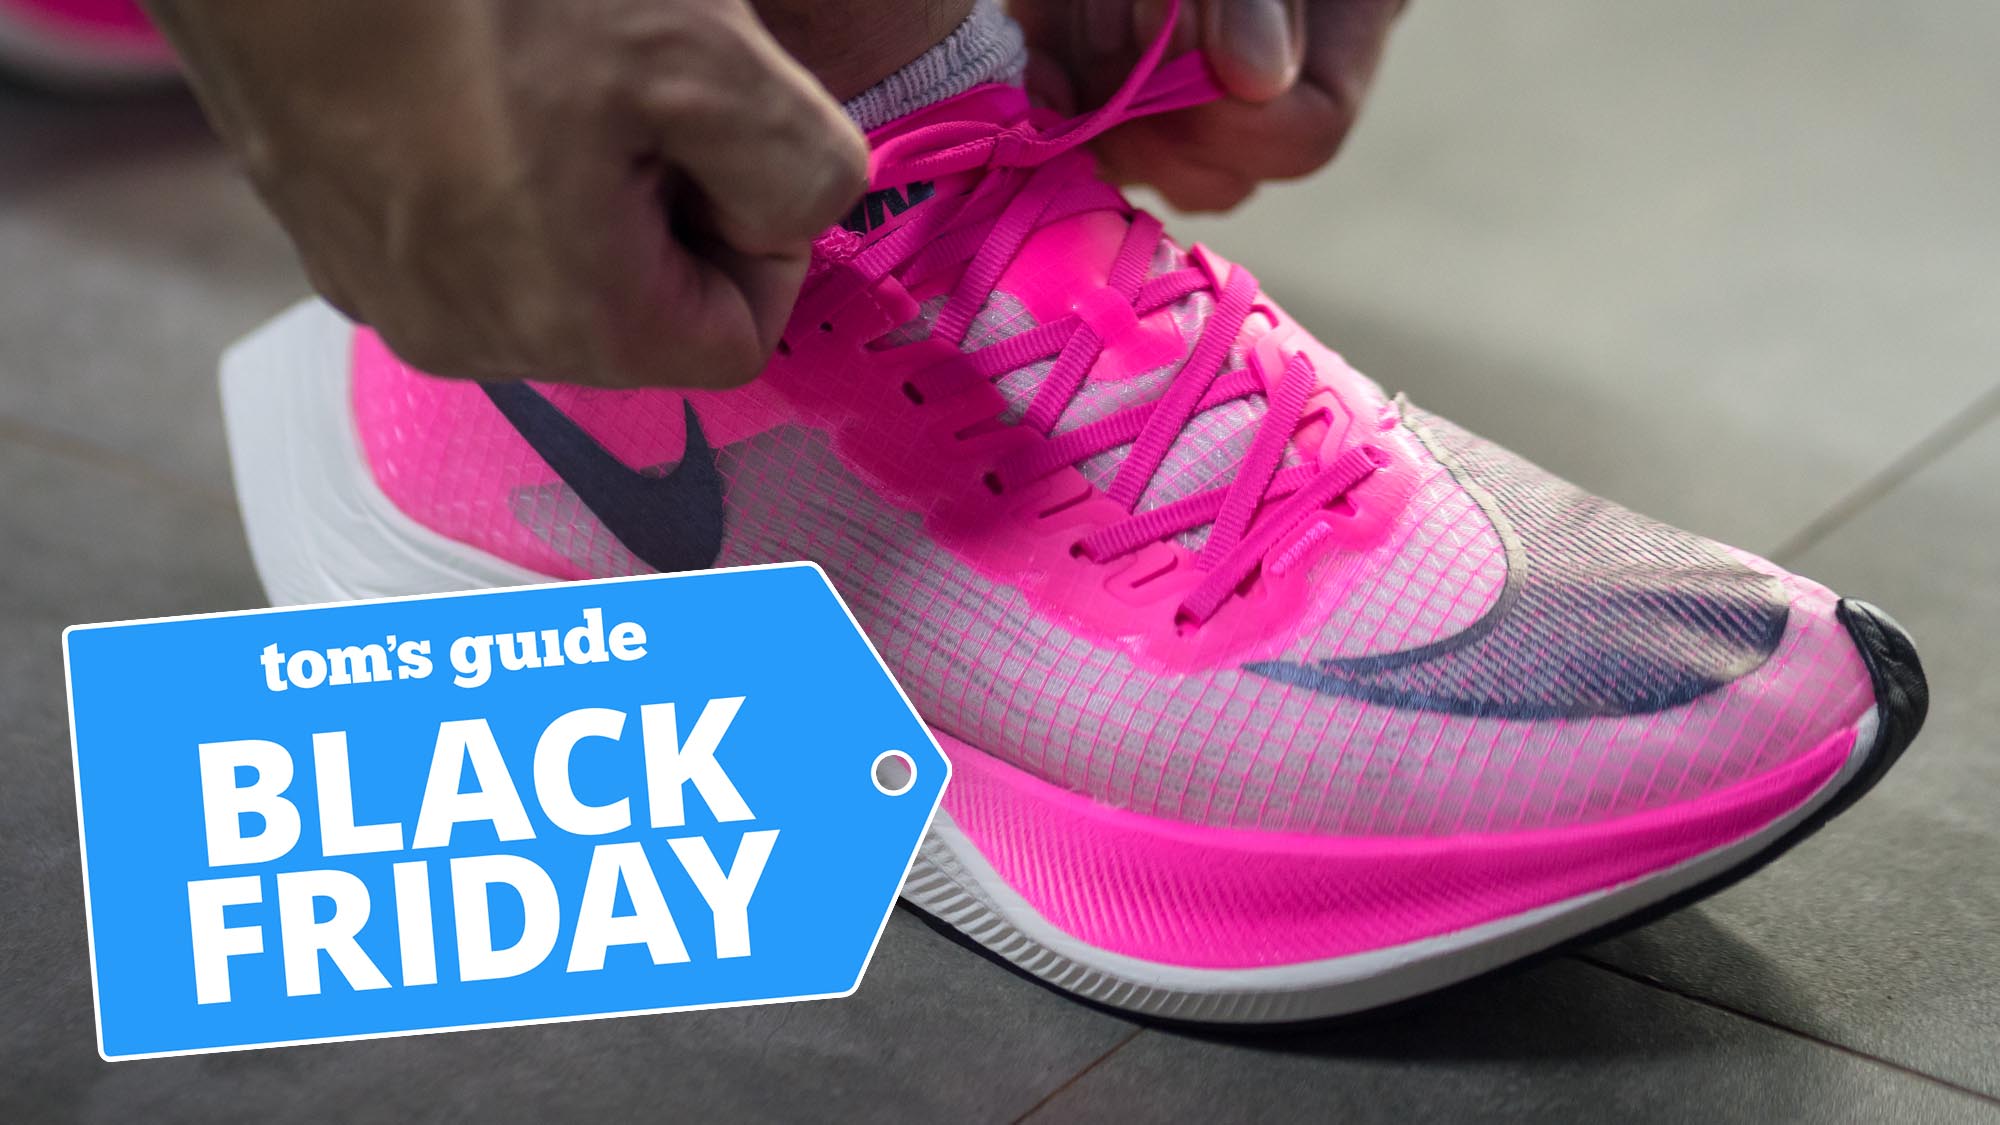 Black Friday running shoe deals 2021— sales what to expect | Tom's Guide